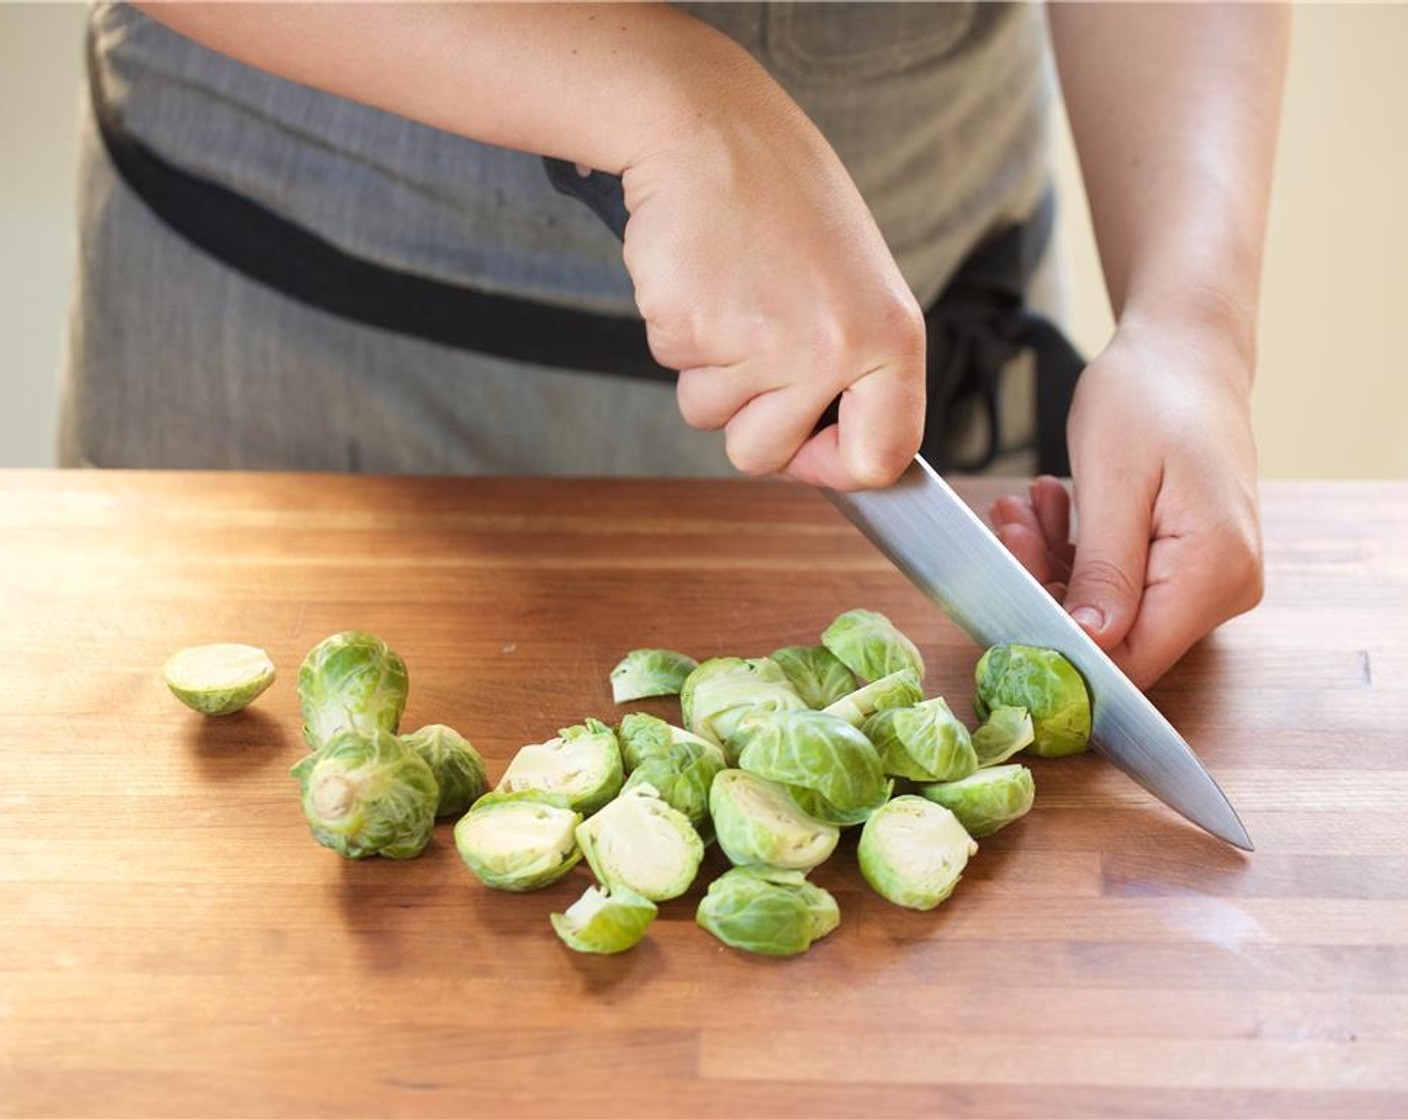 step 1 Heat a medium saucepan over high heat with eight cups of water. Finely chop the Shallot (1) and set aside. Cut the Scallion (1 bunch) into quarter inch thin slices. Set aside. Cut the Brussels Sprouts (2 1/2 cups) in half, and set aside.